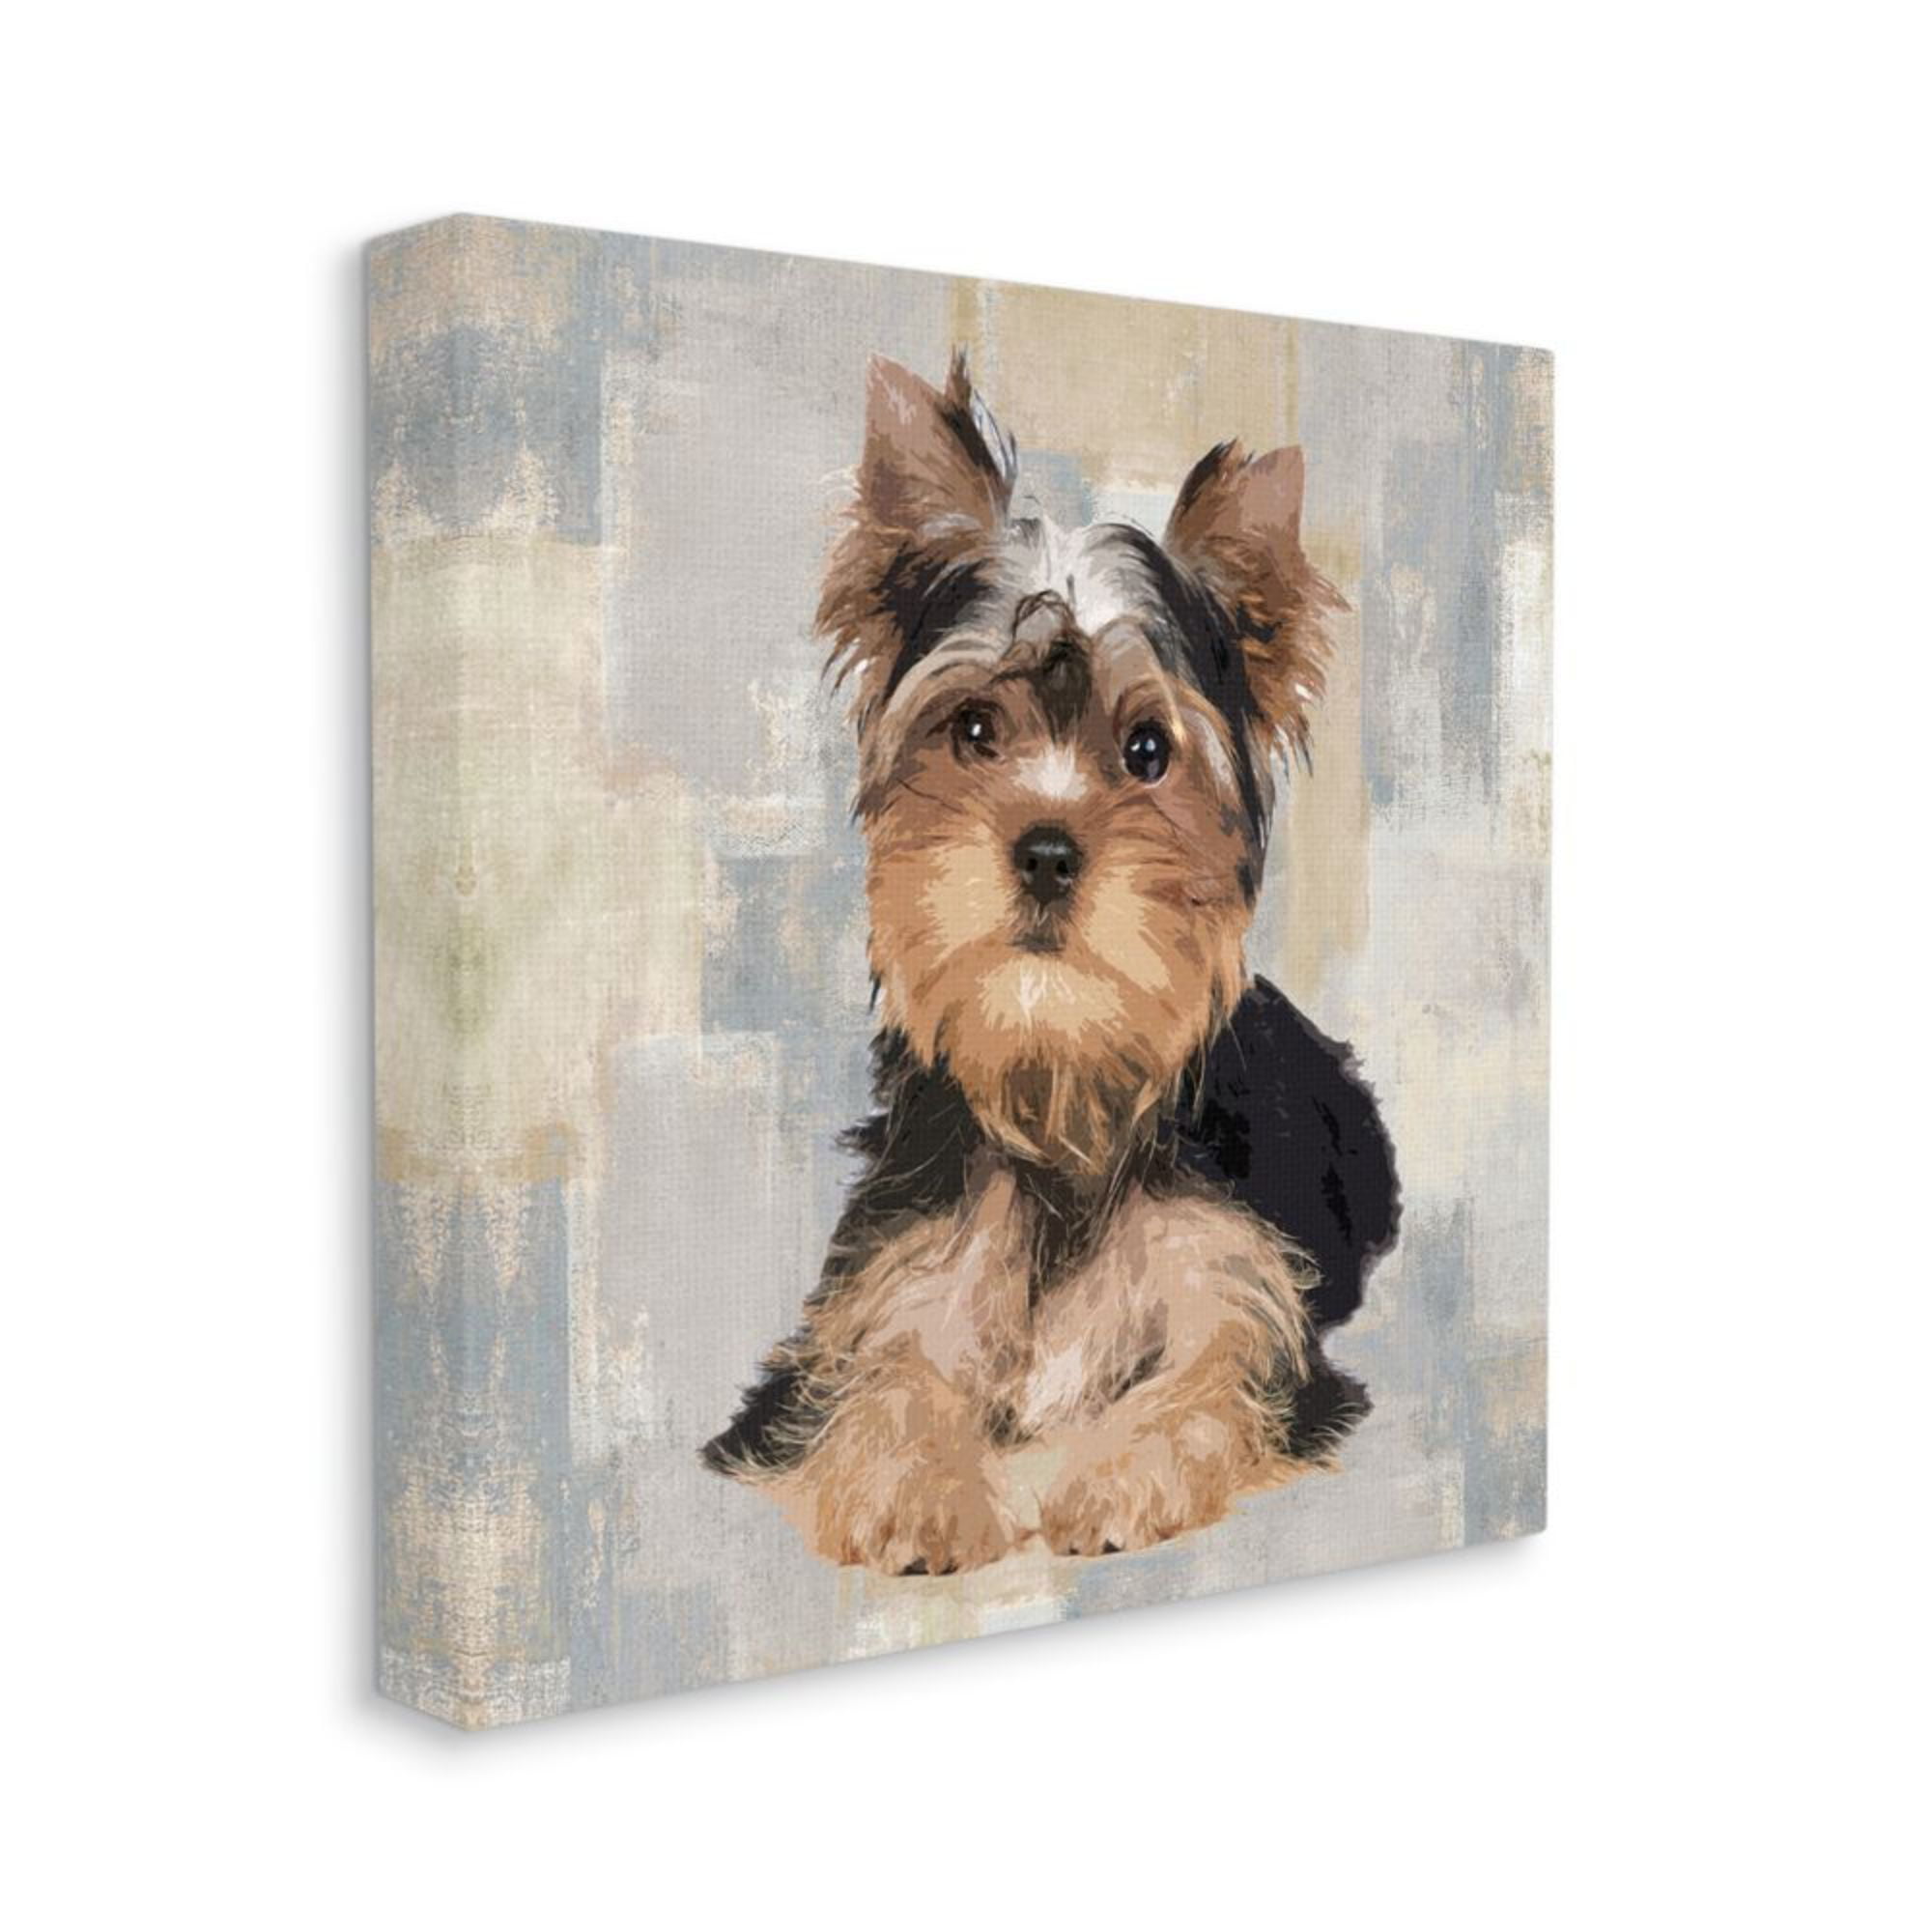 Dog Advice YORKSHIRE TERRIER Sign Wood 10"x5"  Wall Hanging Picture Plaque 